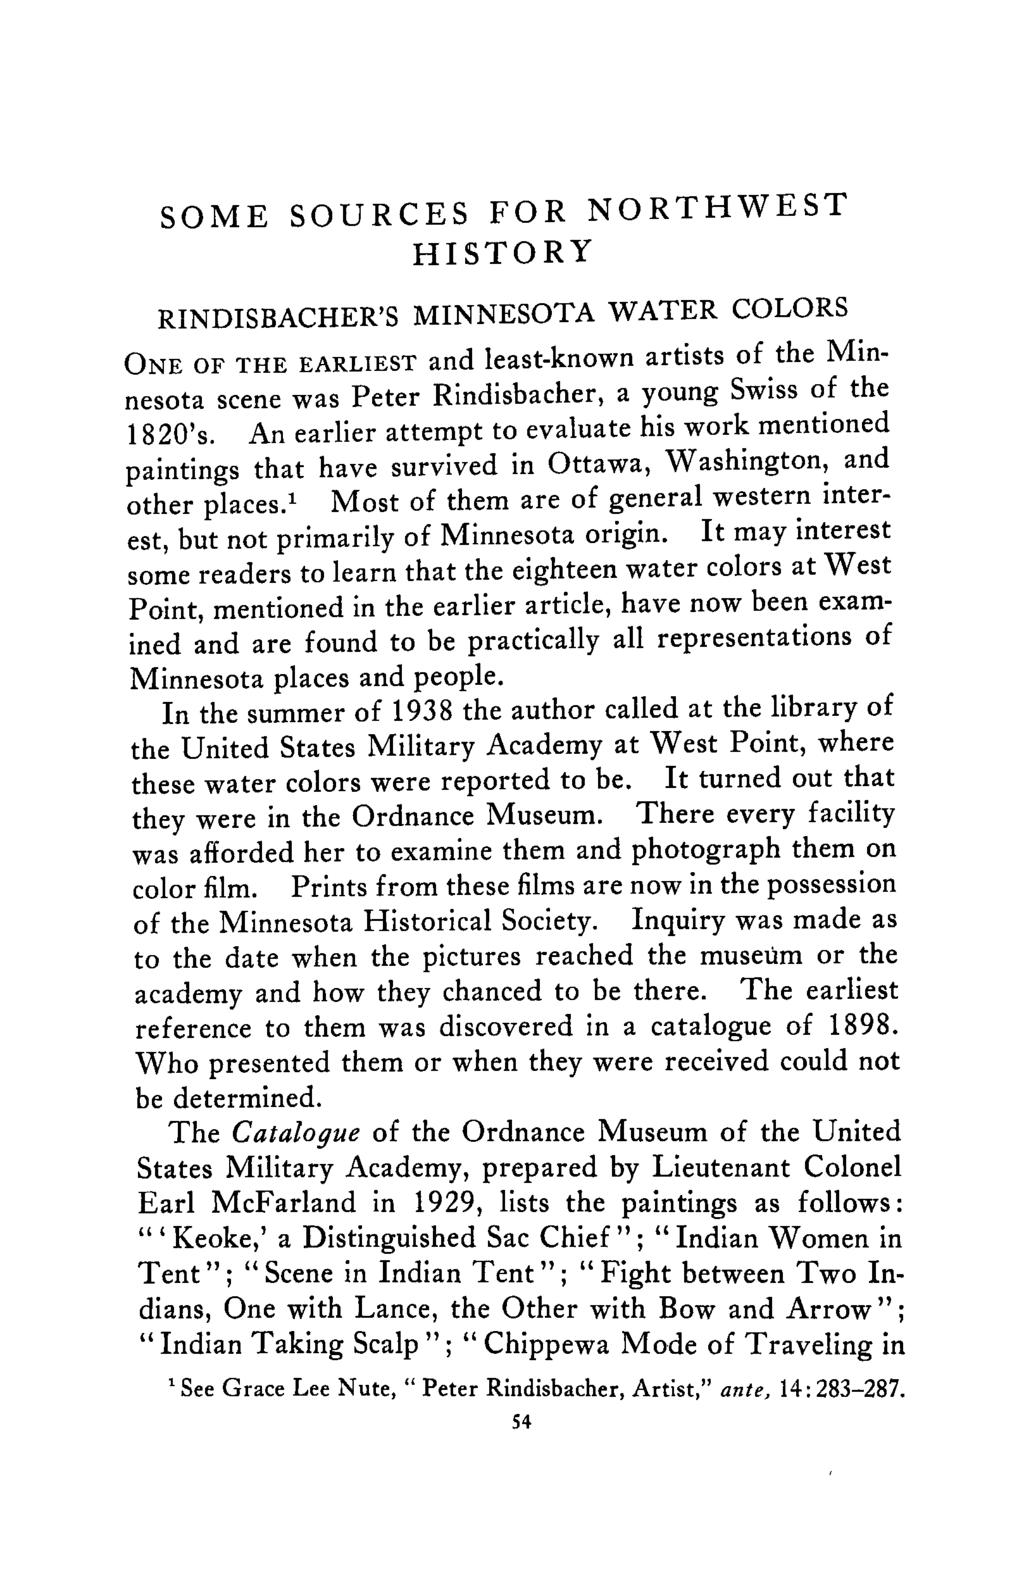 SOME SOURCES FOR NORTHWEST HISTORY RINDISBACHER'S MINNESOTA WATER COLORS ONE OF THE EARLIEST and least-known artists of the Minnesota scene was Peter Rindlsbacher, a young Swiss of the 1820's.